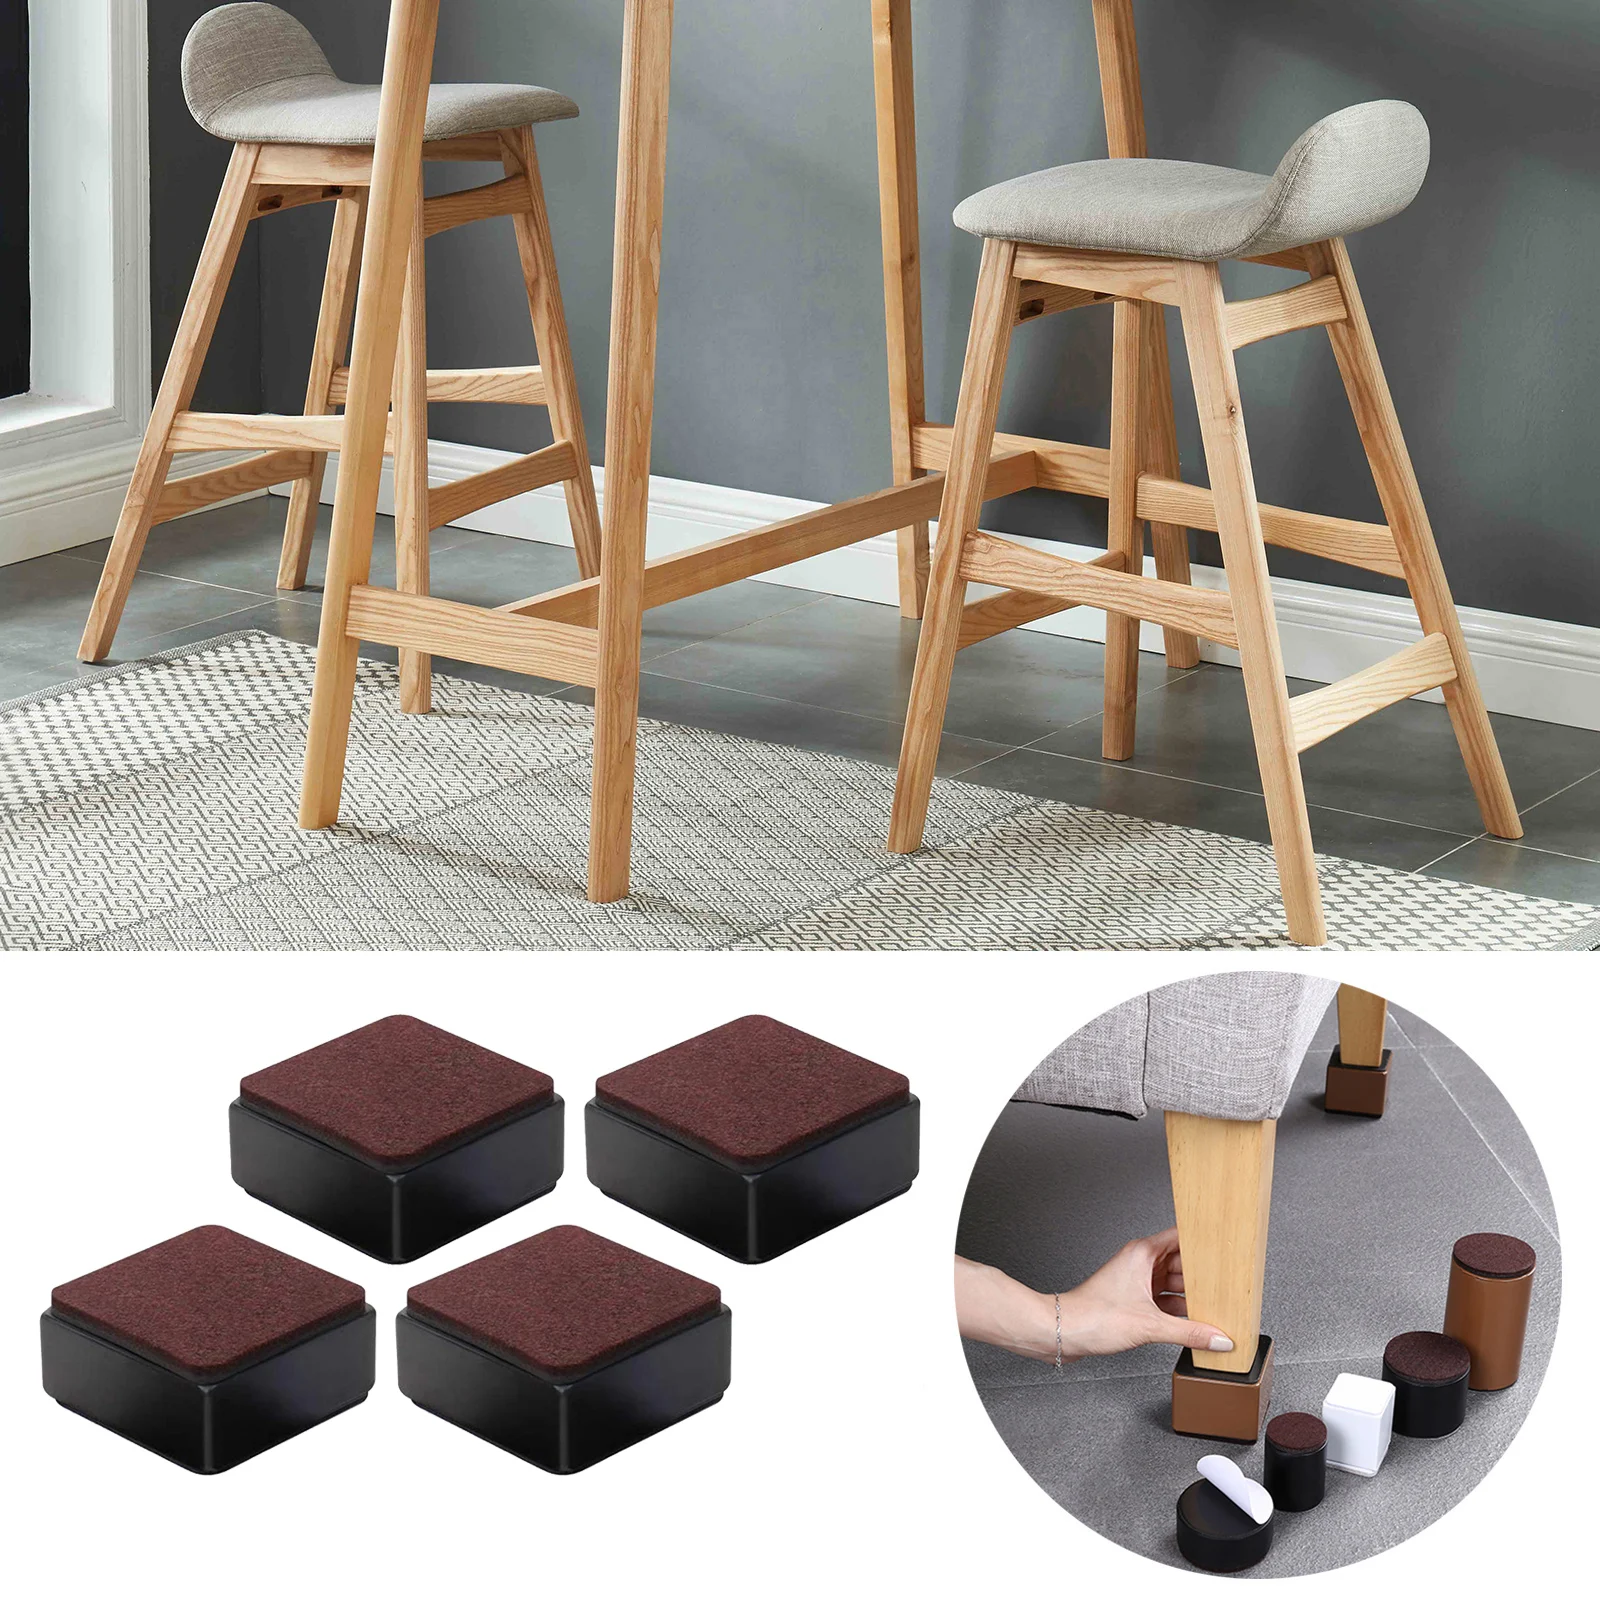 4 Pieces Bed Risers Solid Desk Sofa Feet Protector Anti Slip under Bed Storage for Bedroom Living Room